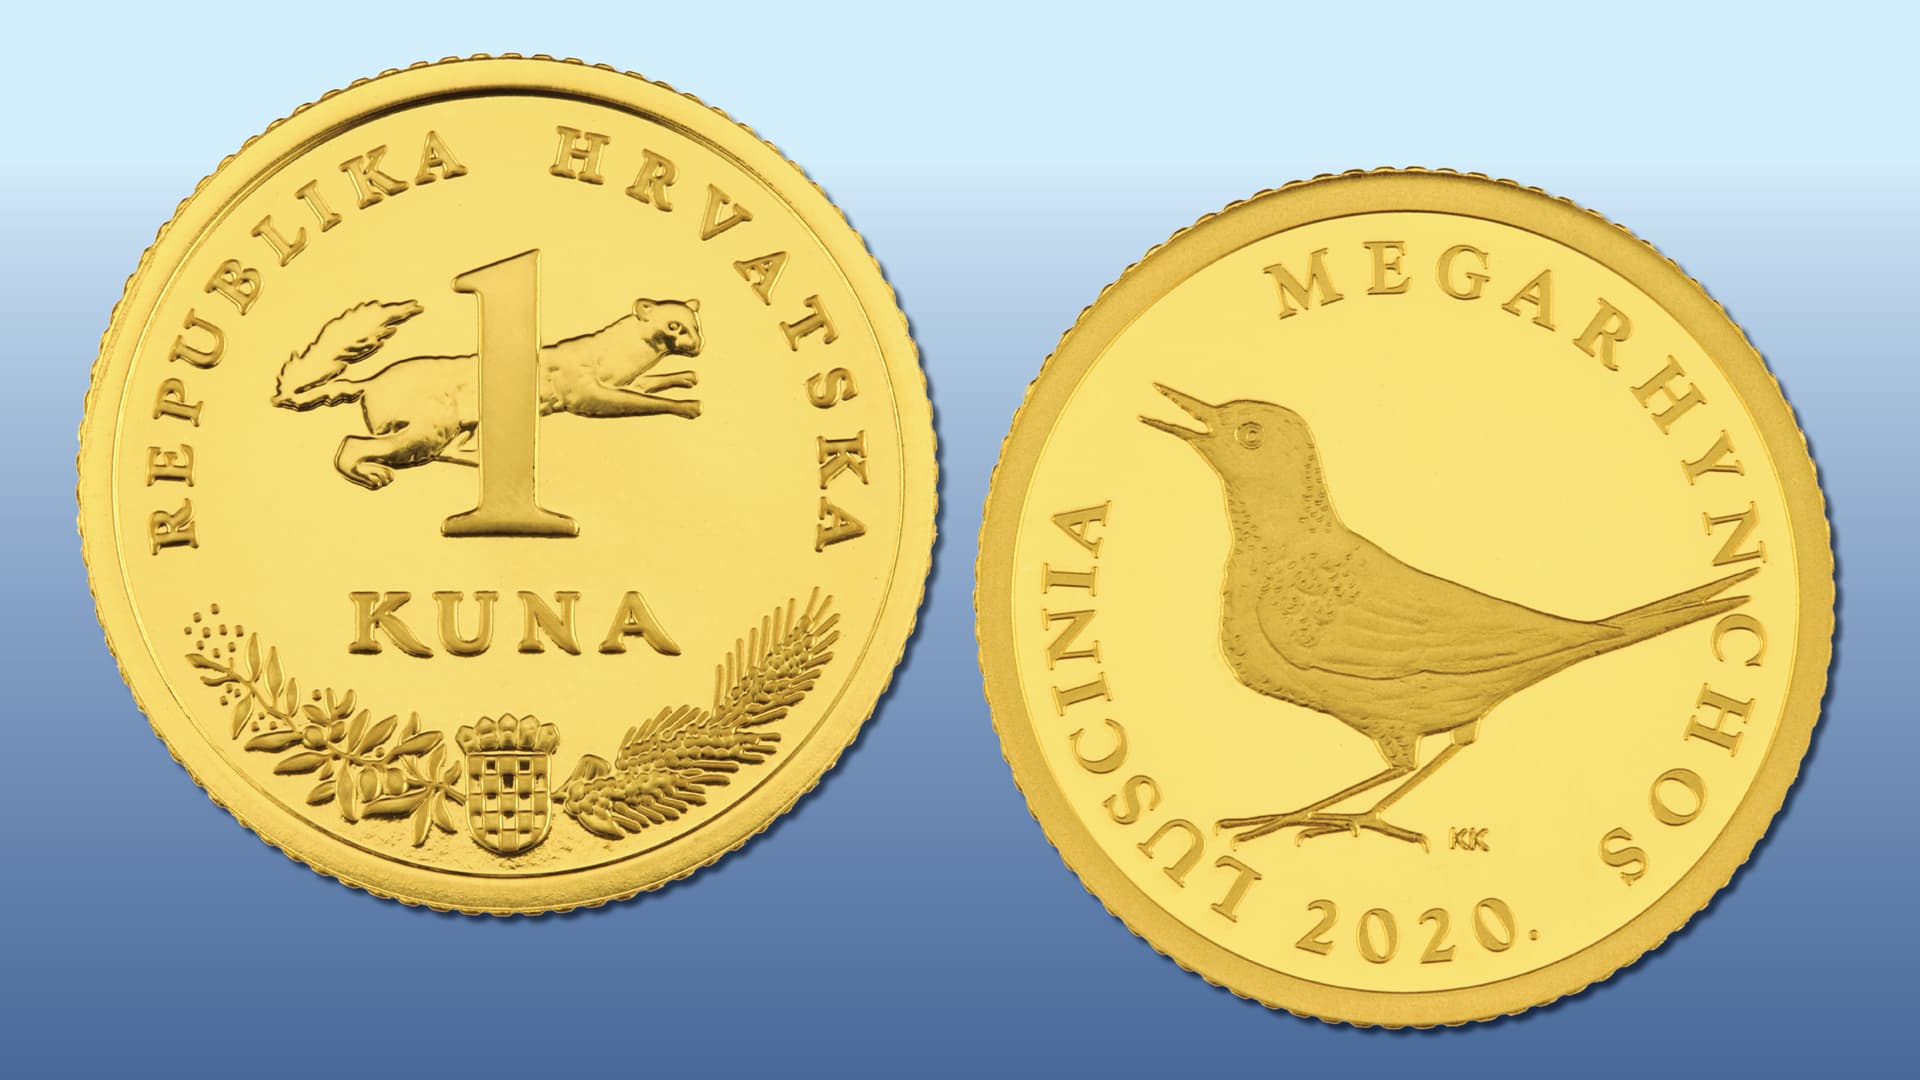 CNB issues a new “Gold Kuna” coin